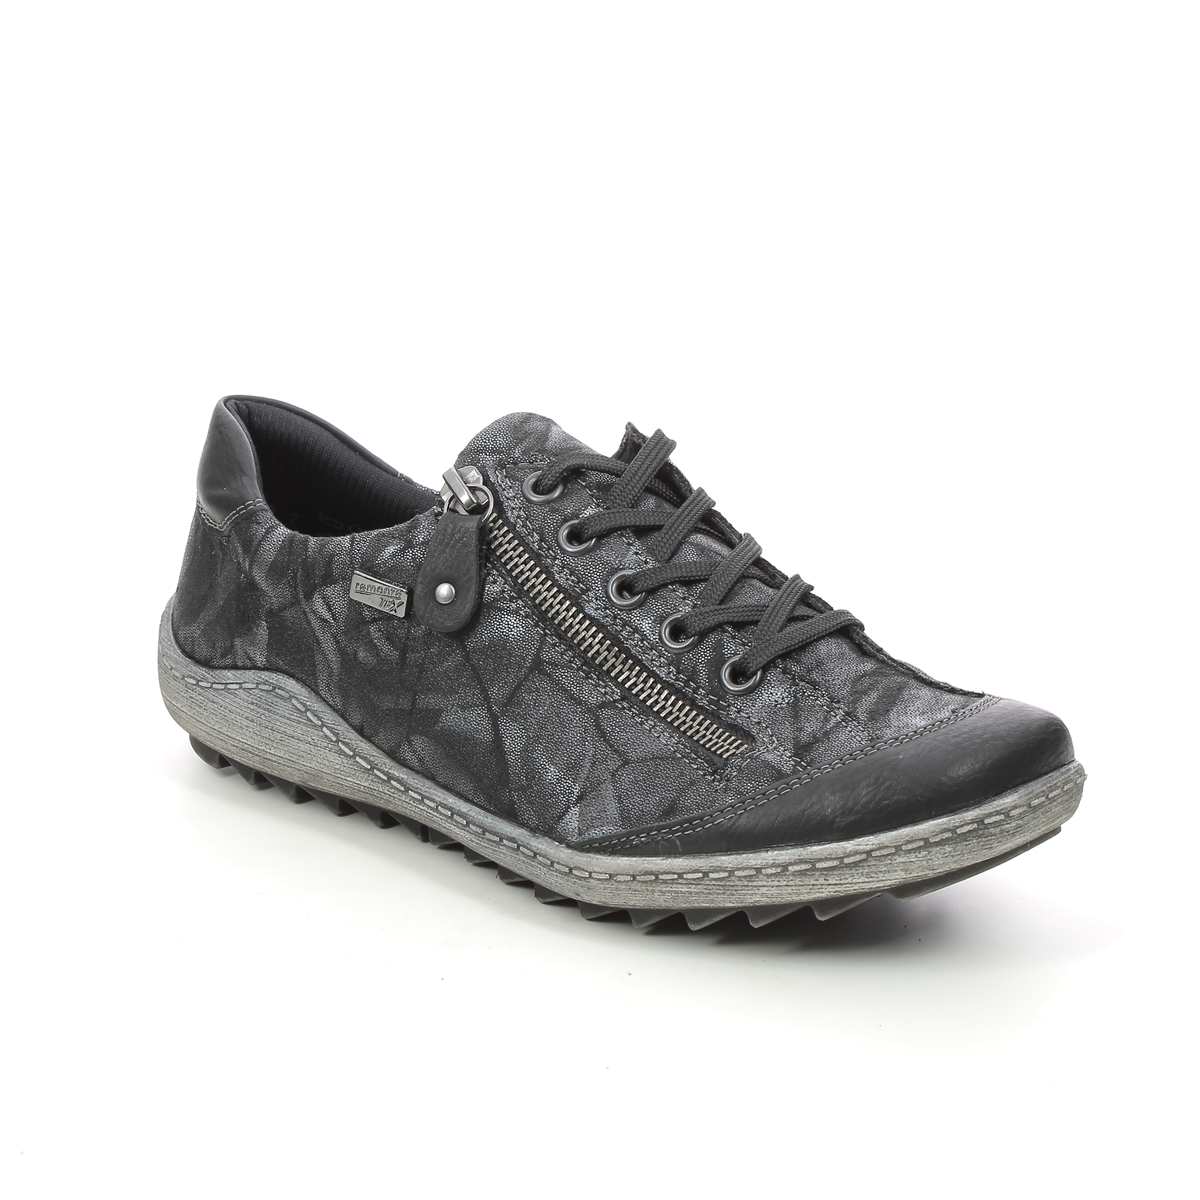 Remonte Zigzip 85 Tex Black Grey Womens Lacing Shoes R1402-05 In Size 38 In Plain Black Grey